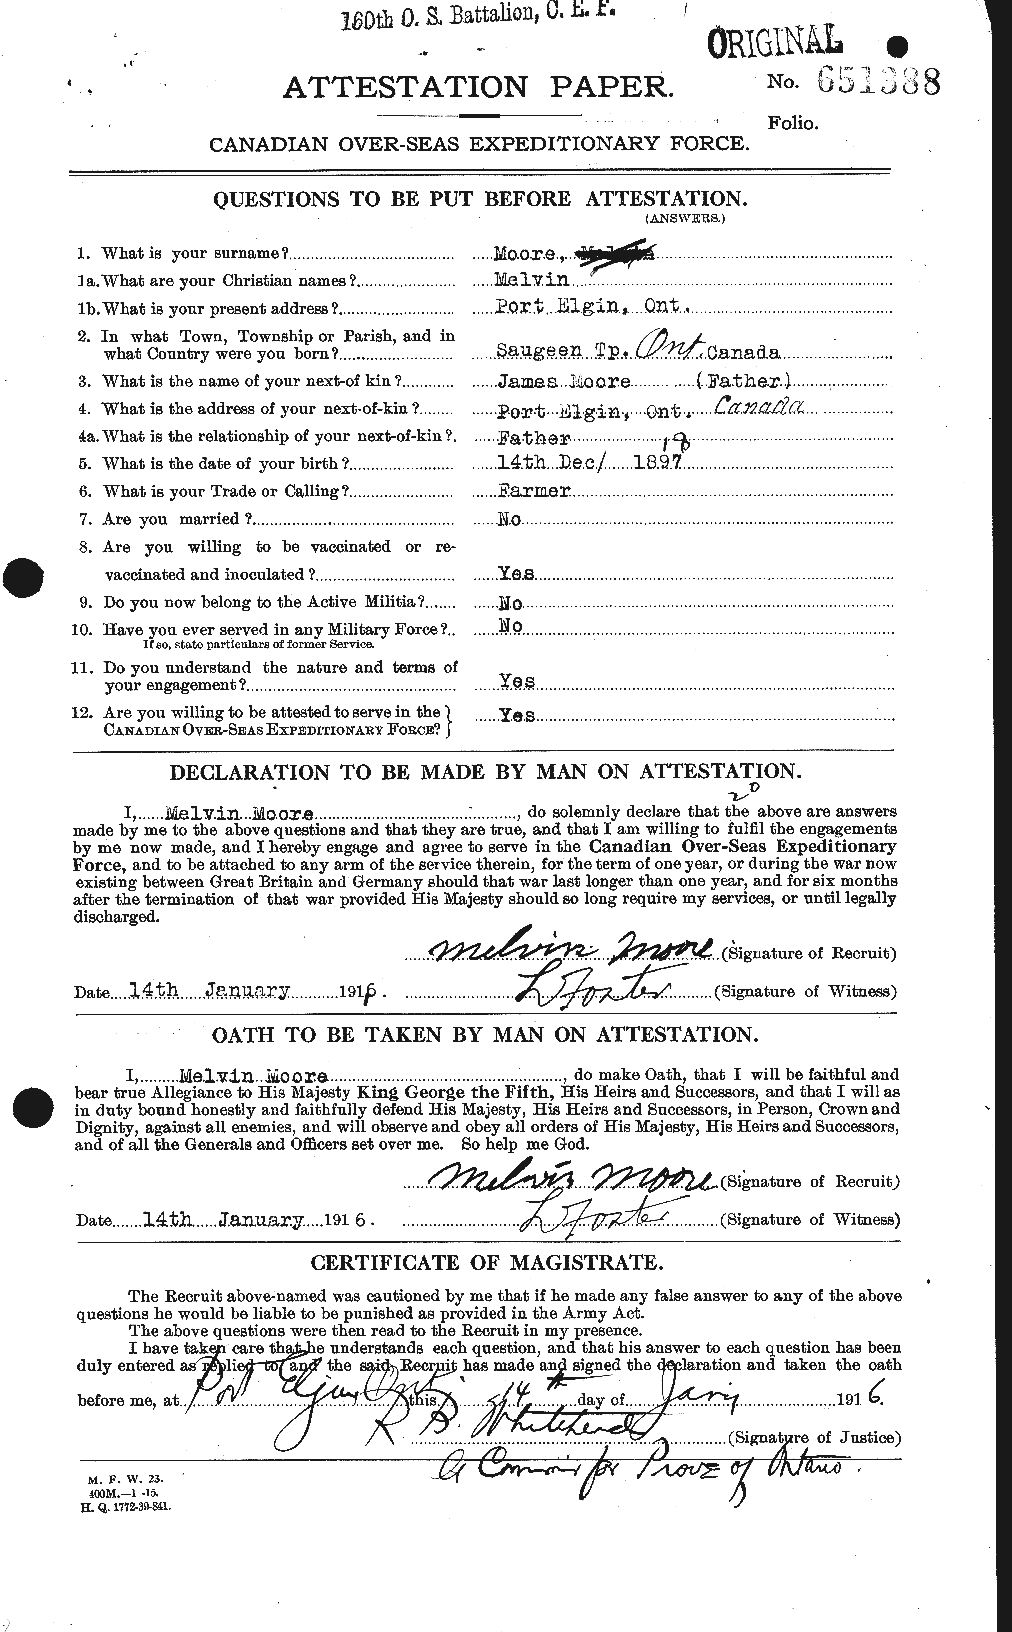 Personnel Records of the First World War - CEF 503438a